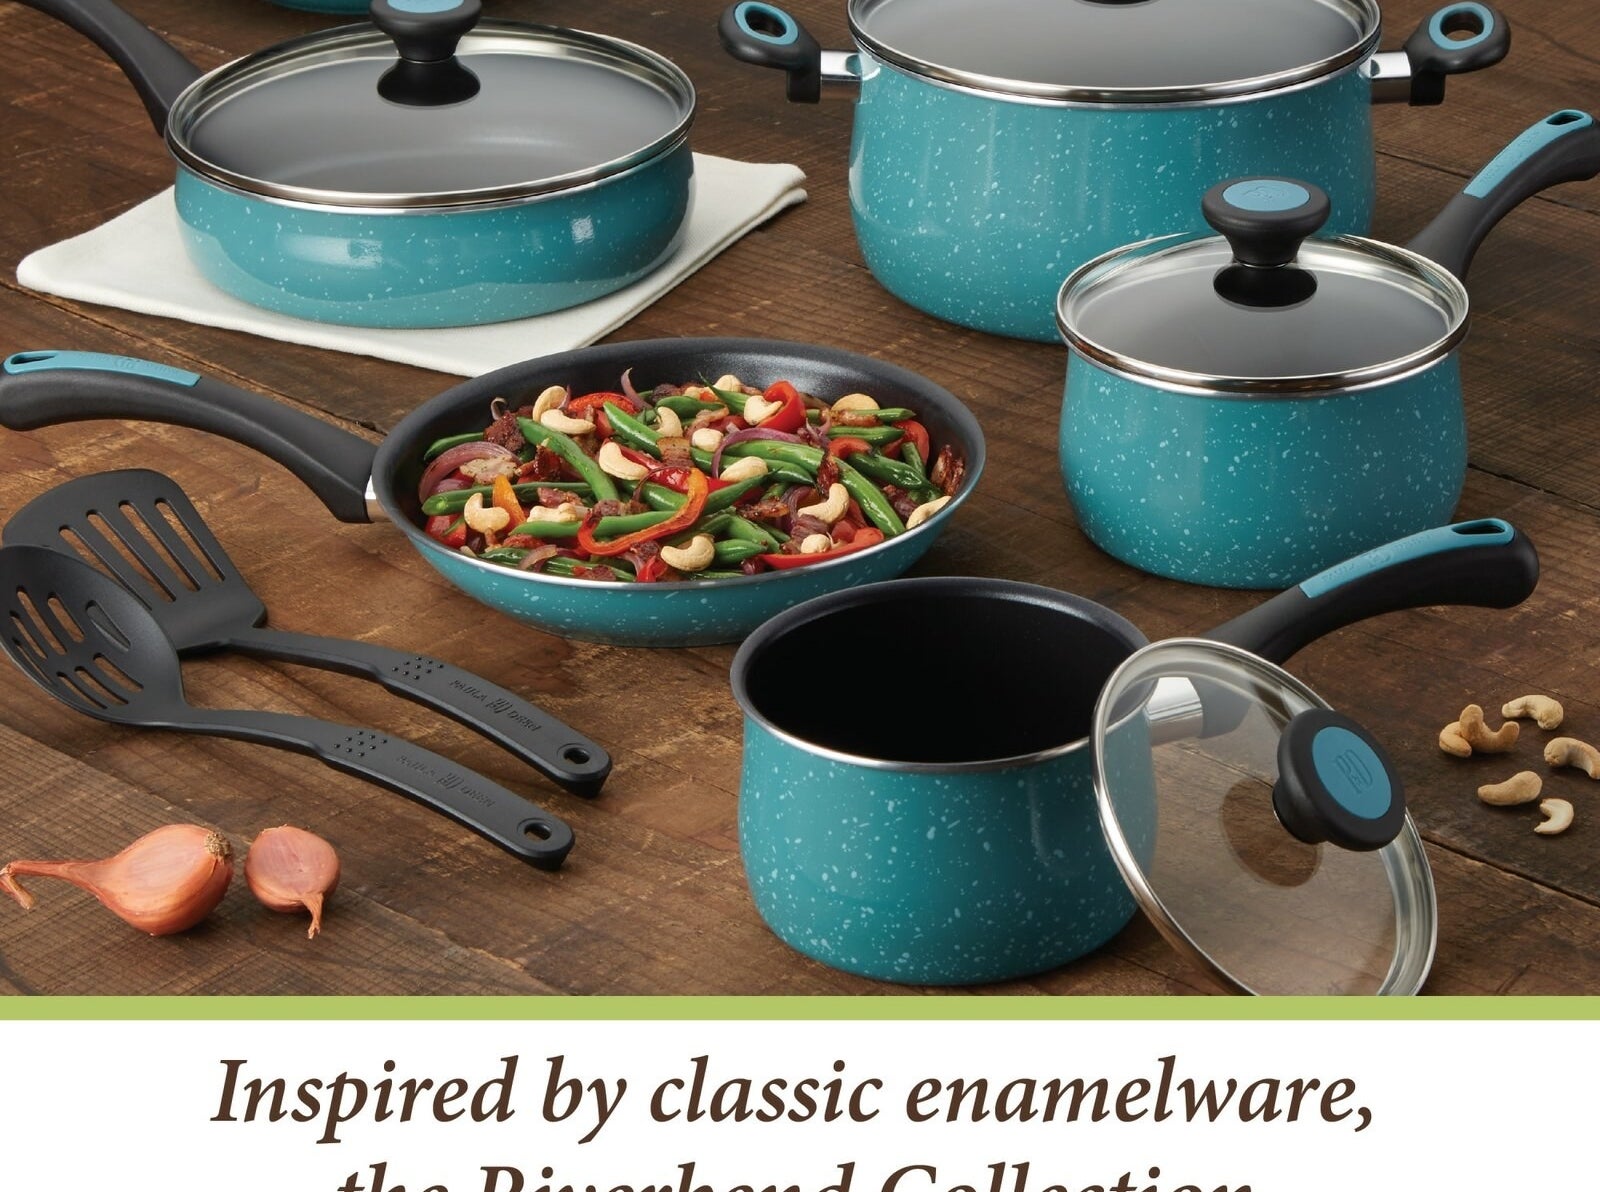 The cookware set in teal with speckled porcelain exterior